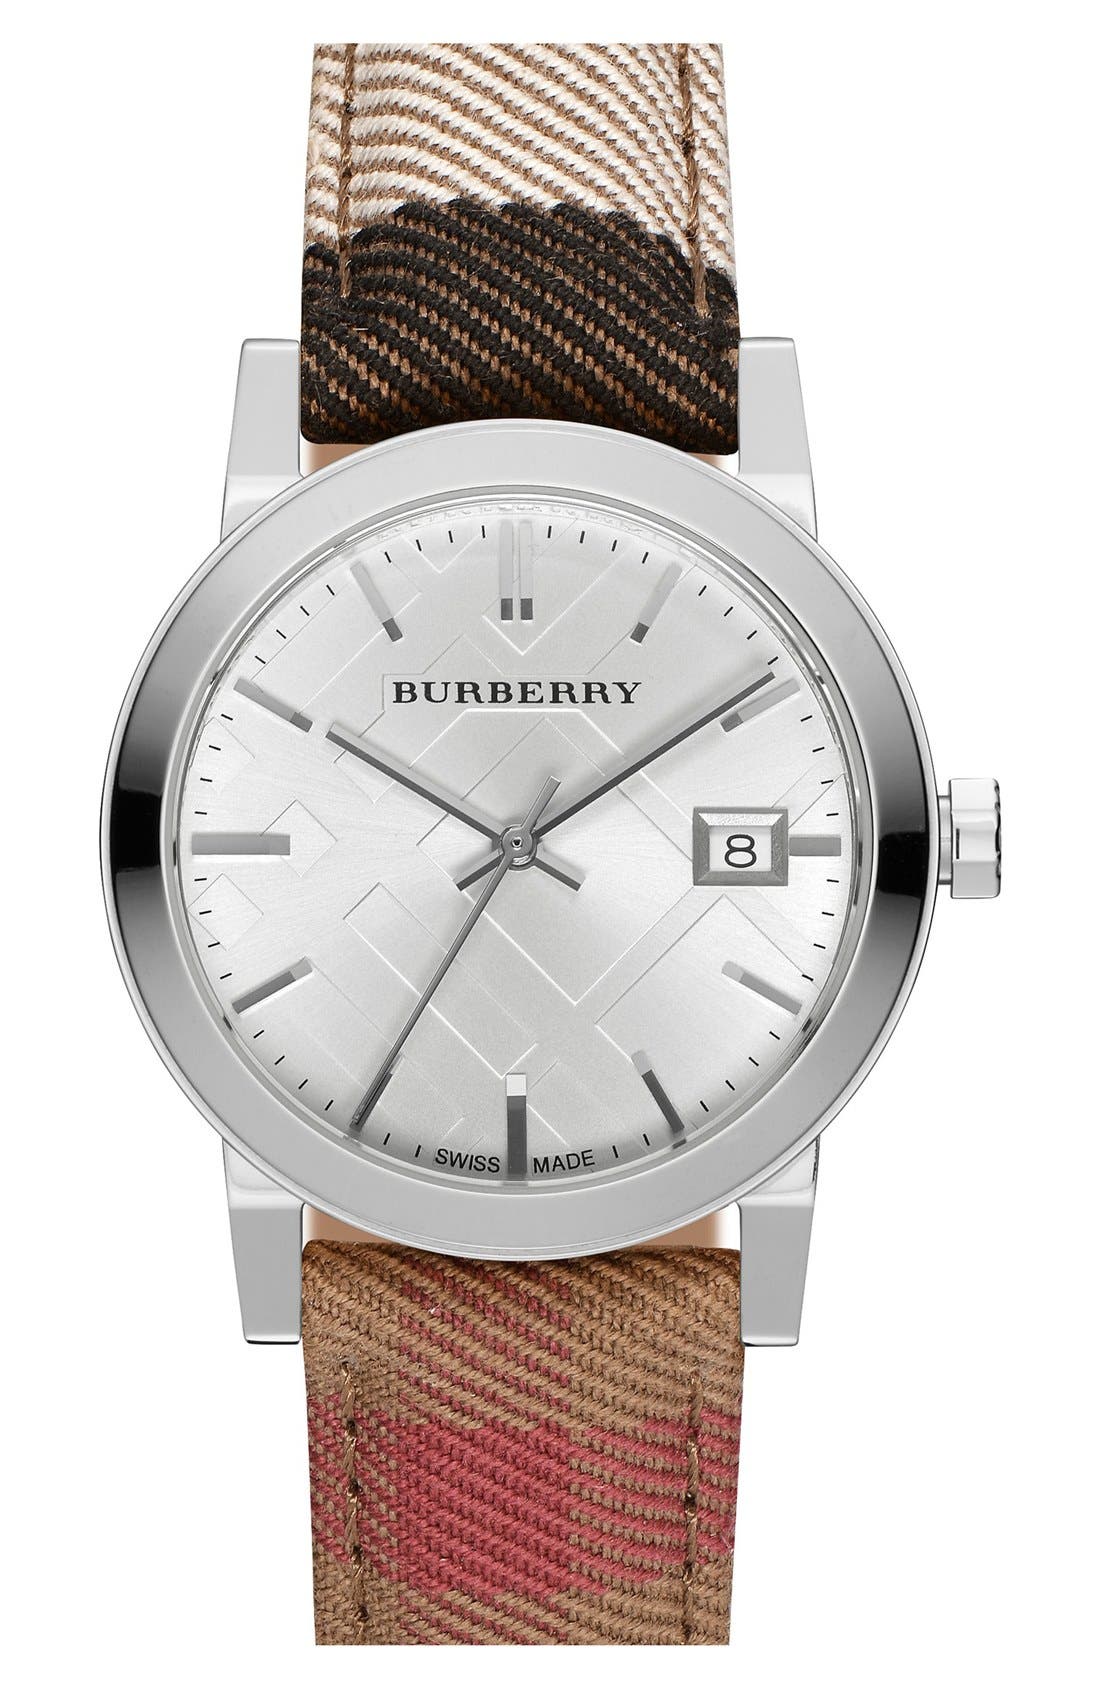 burberry watches nordstrom